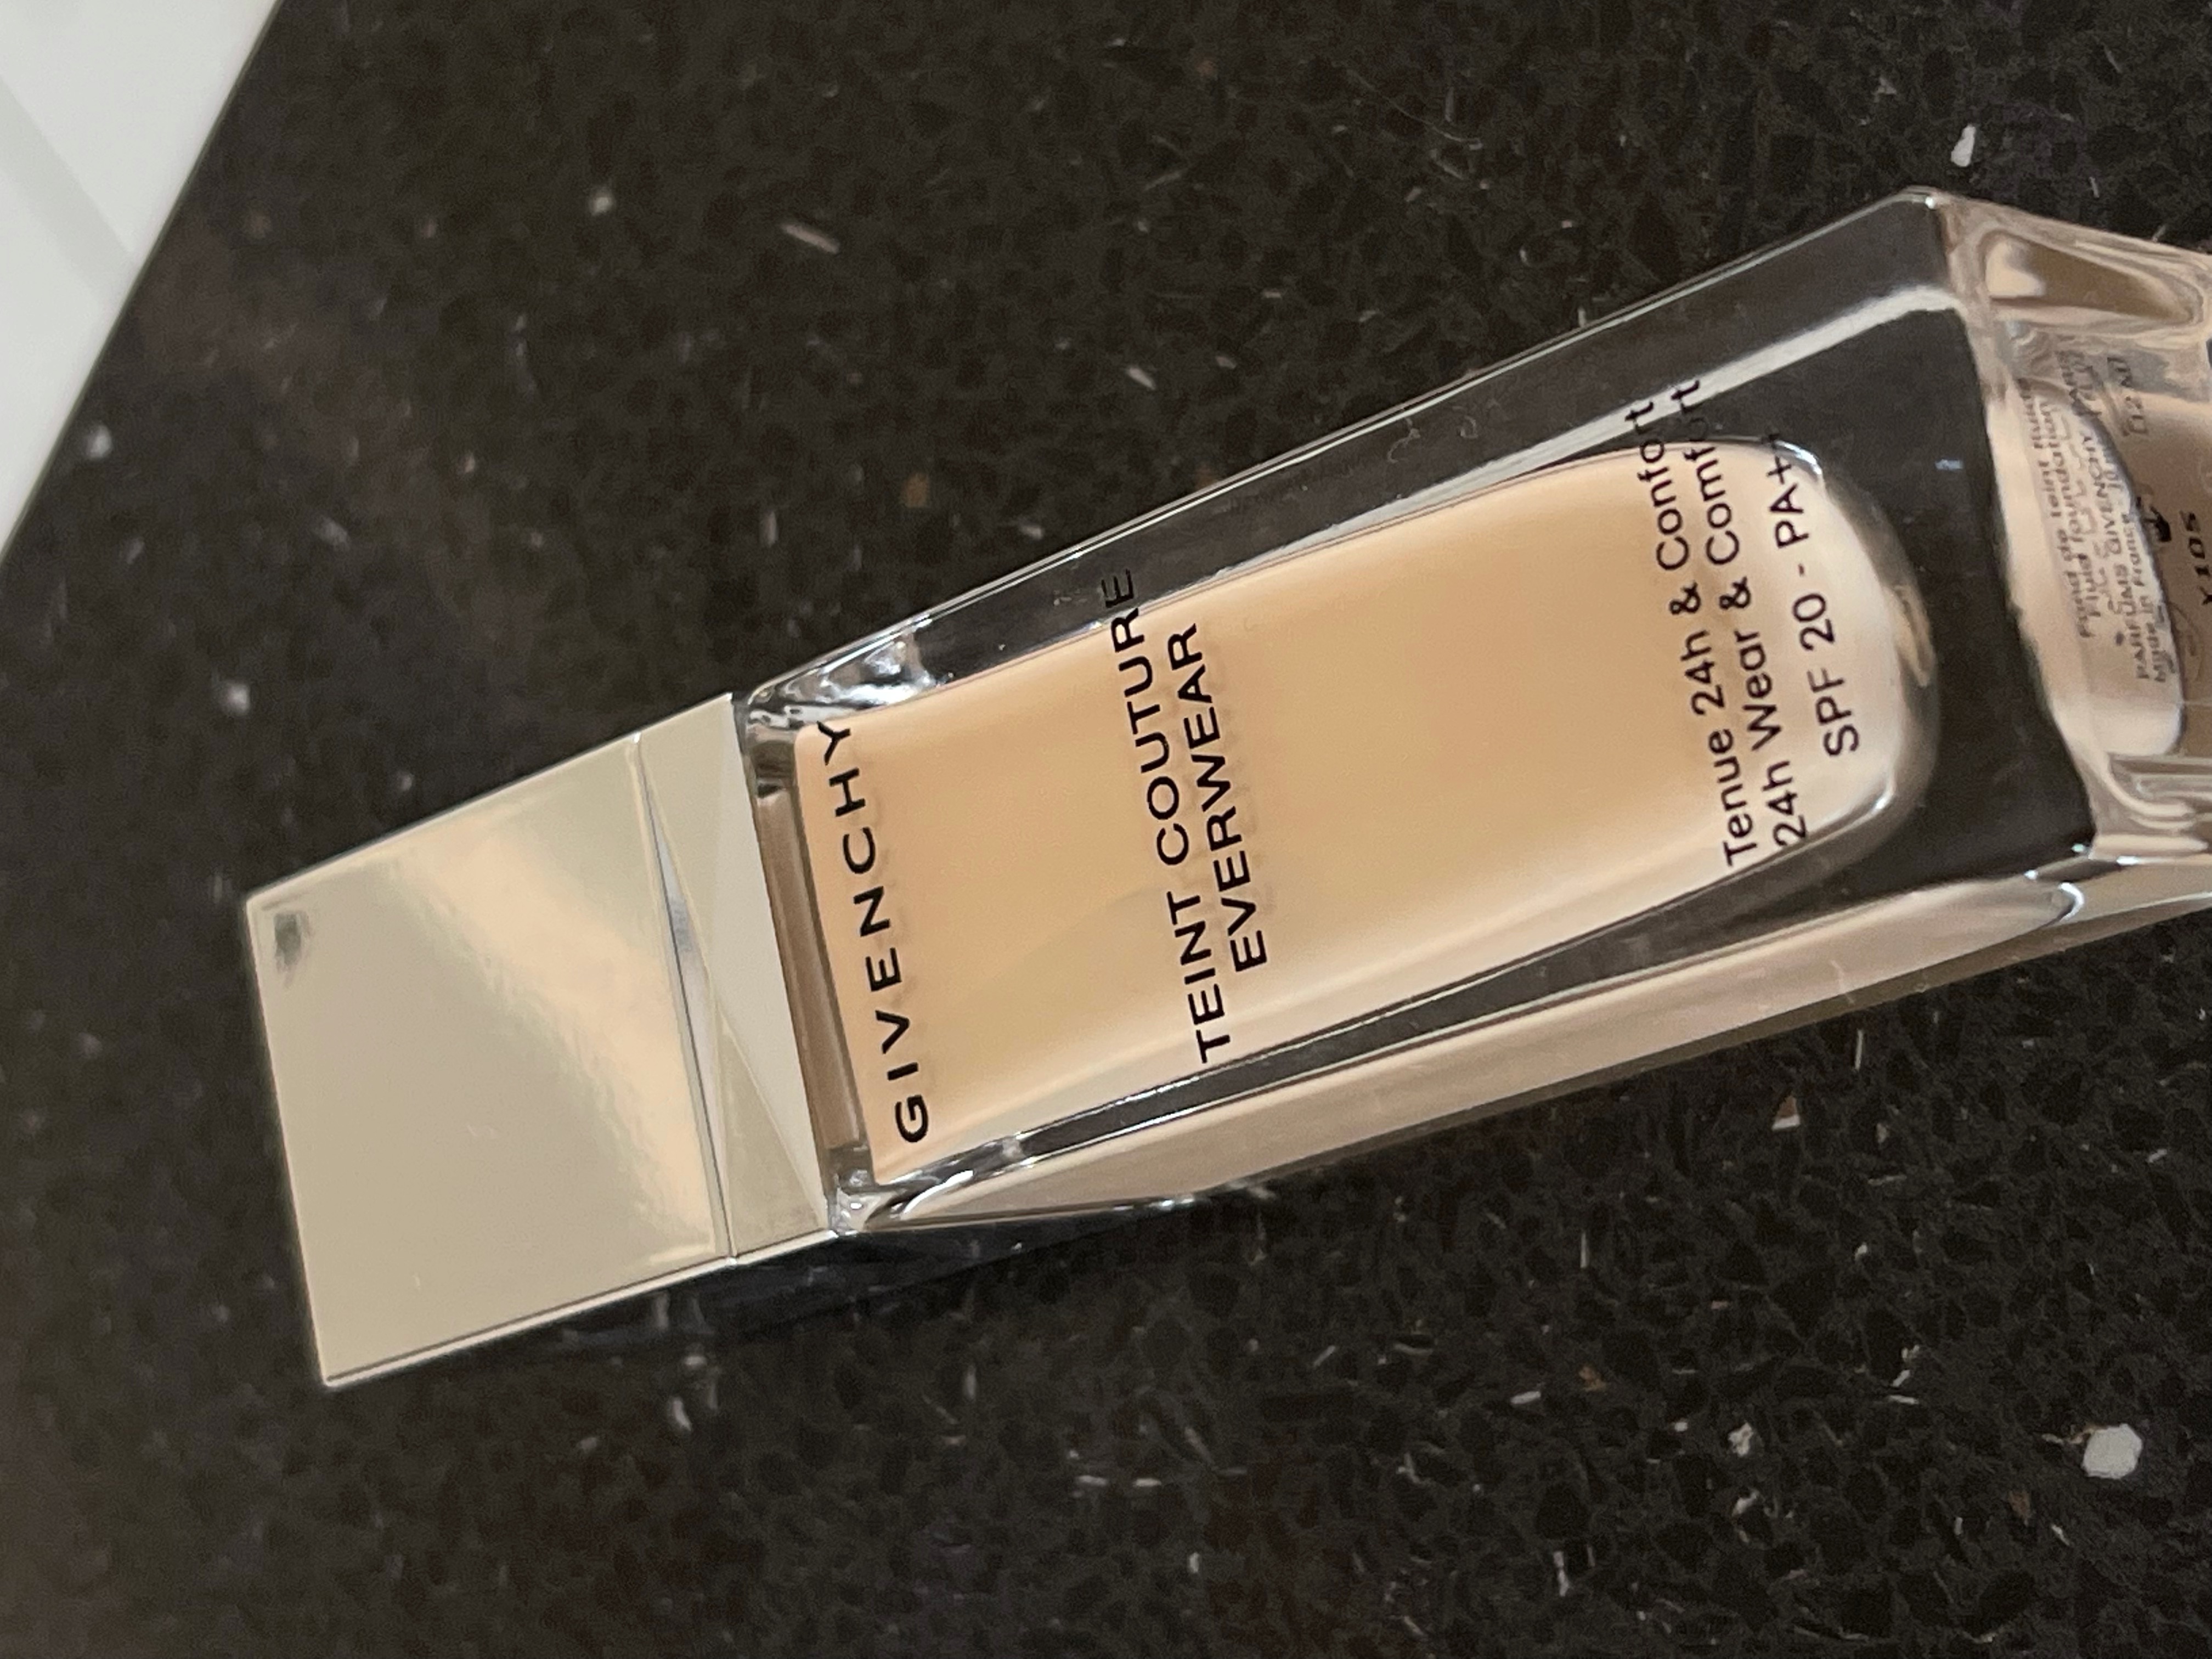 Givenchy Beauty Reviews - 6 Reviews of  | Sitejabber